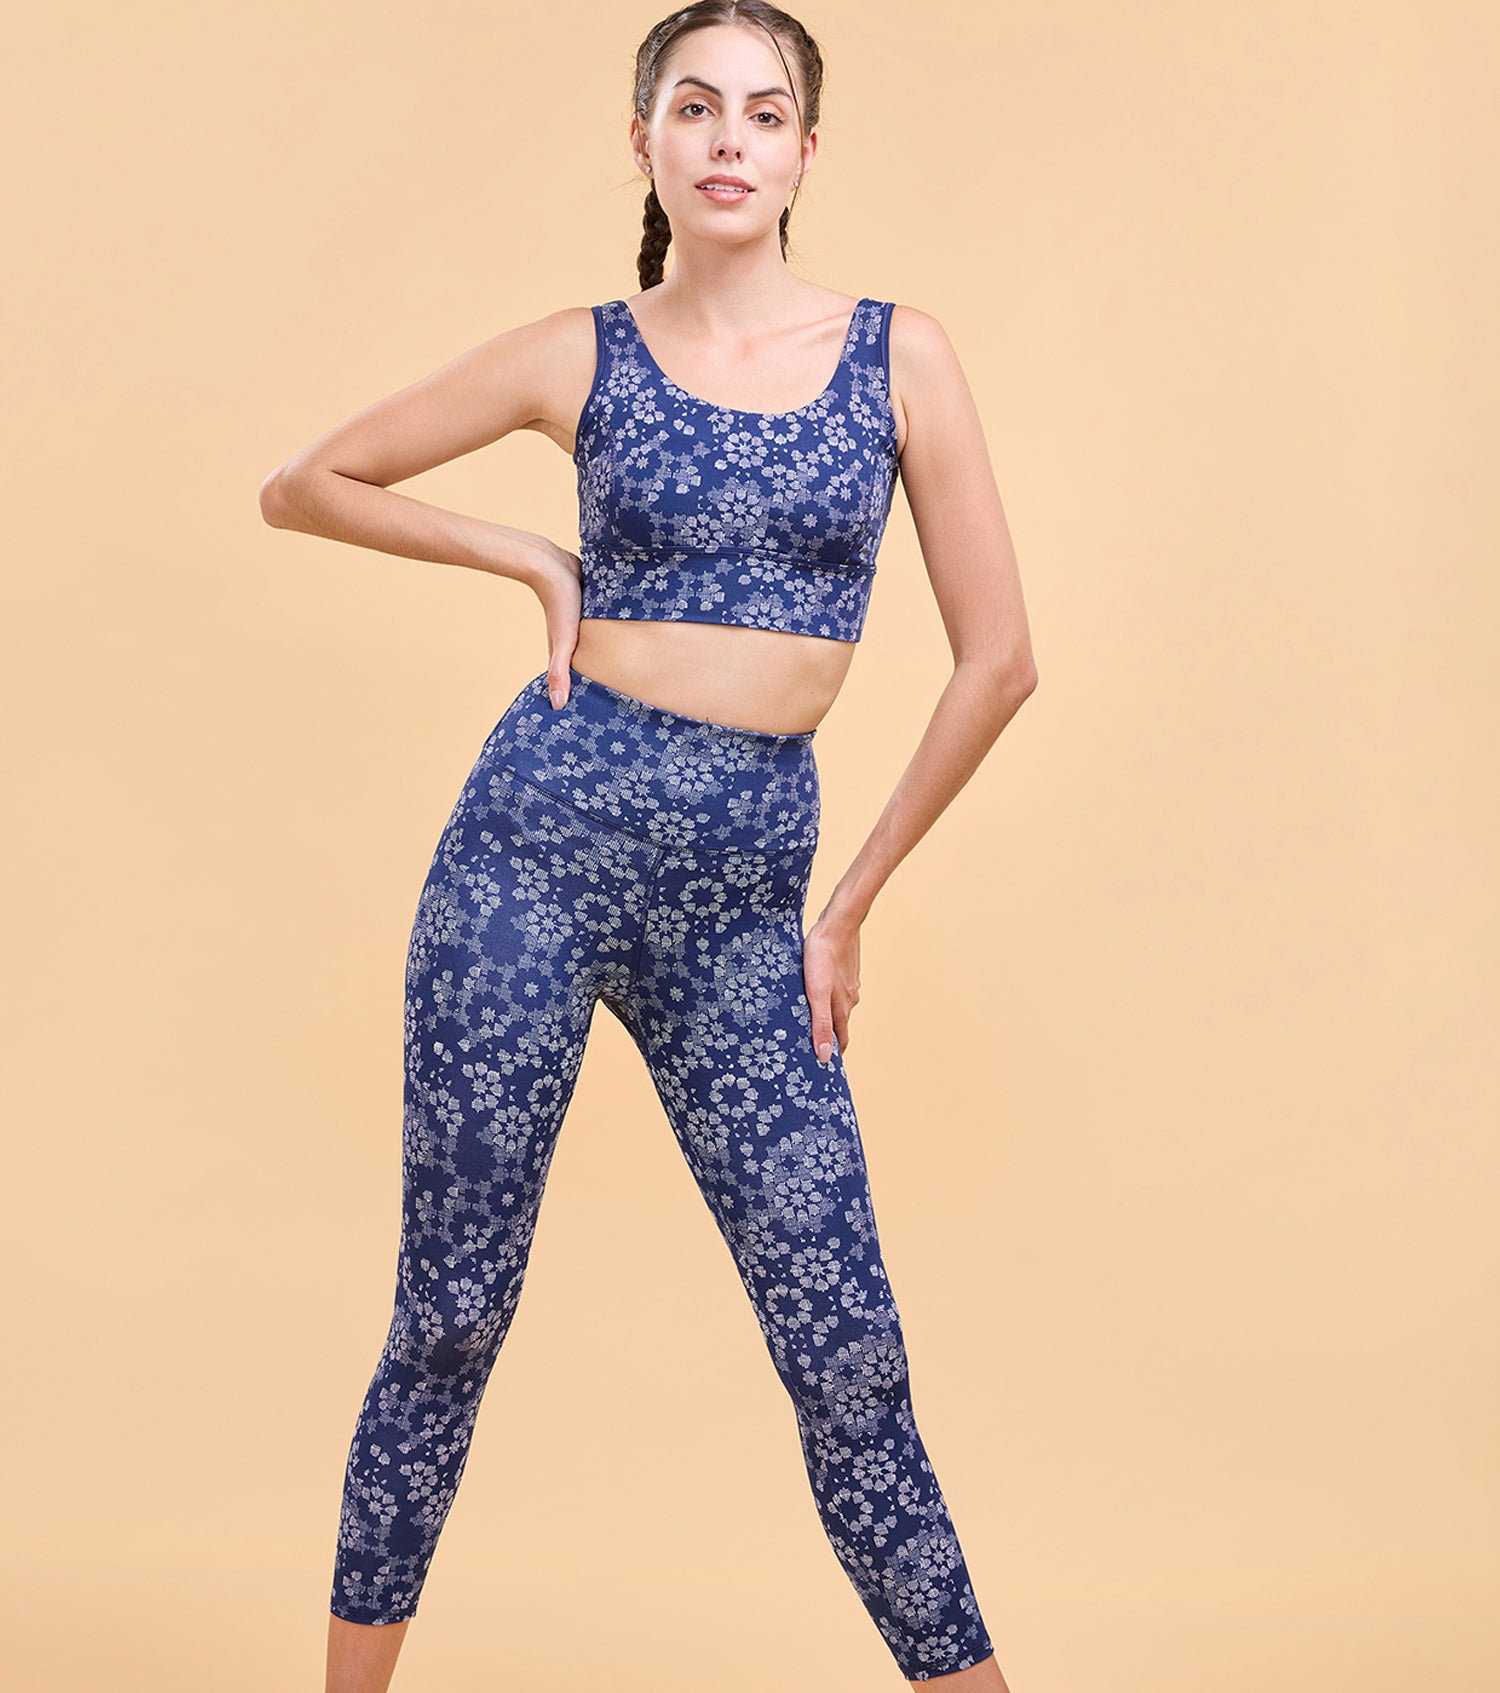 Enamor A607 Printed Legging - High-Waisted 7/8 Length Dry Fit Leggings with Stylish Prints